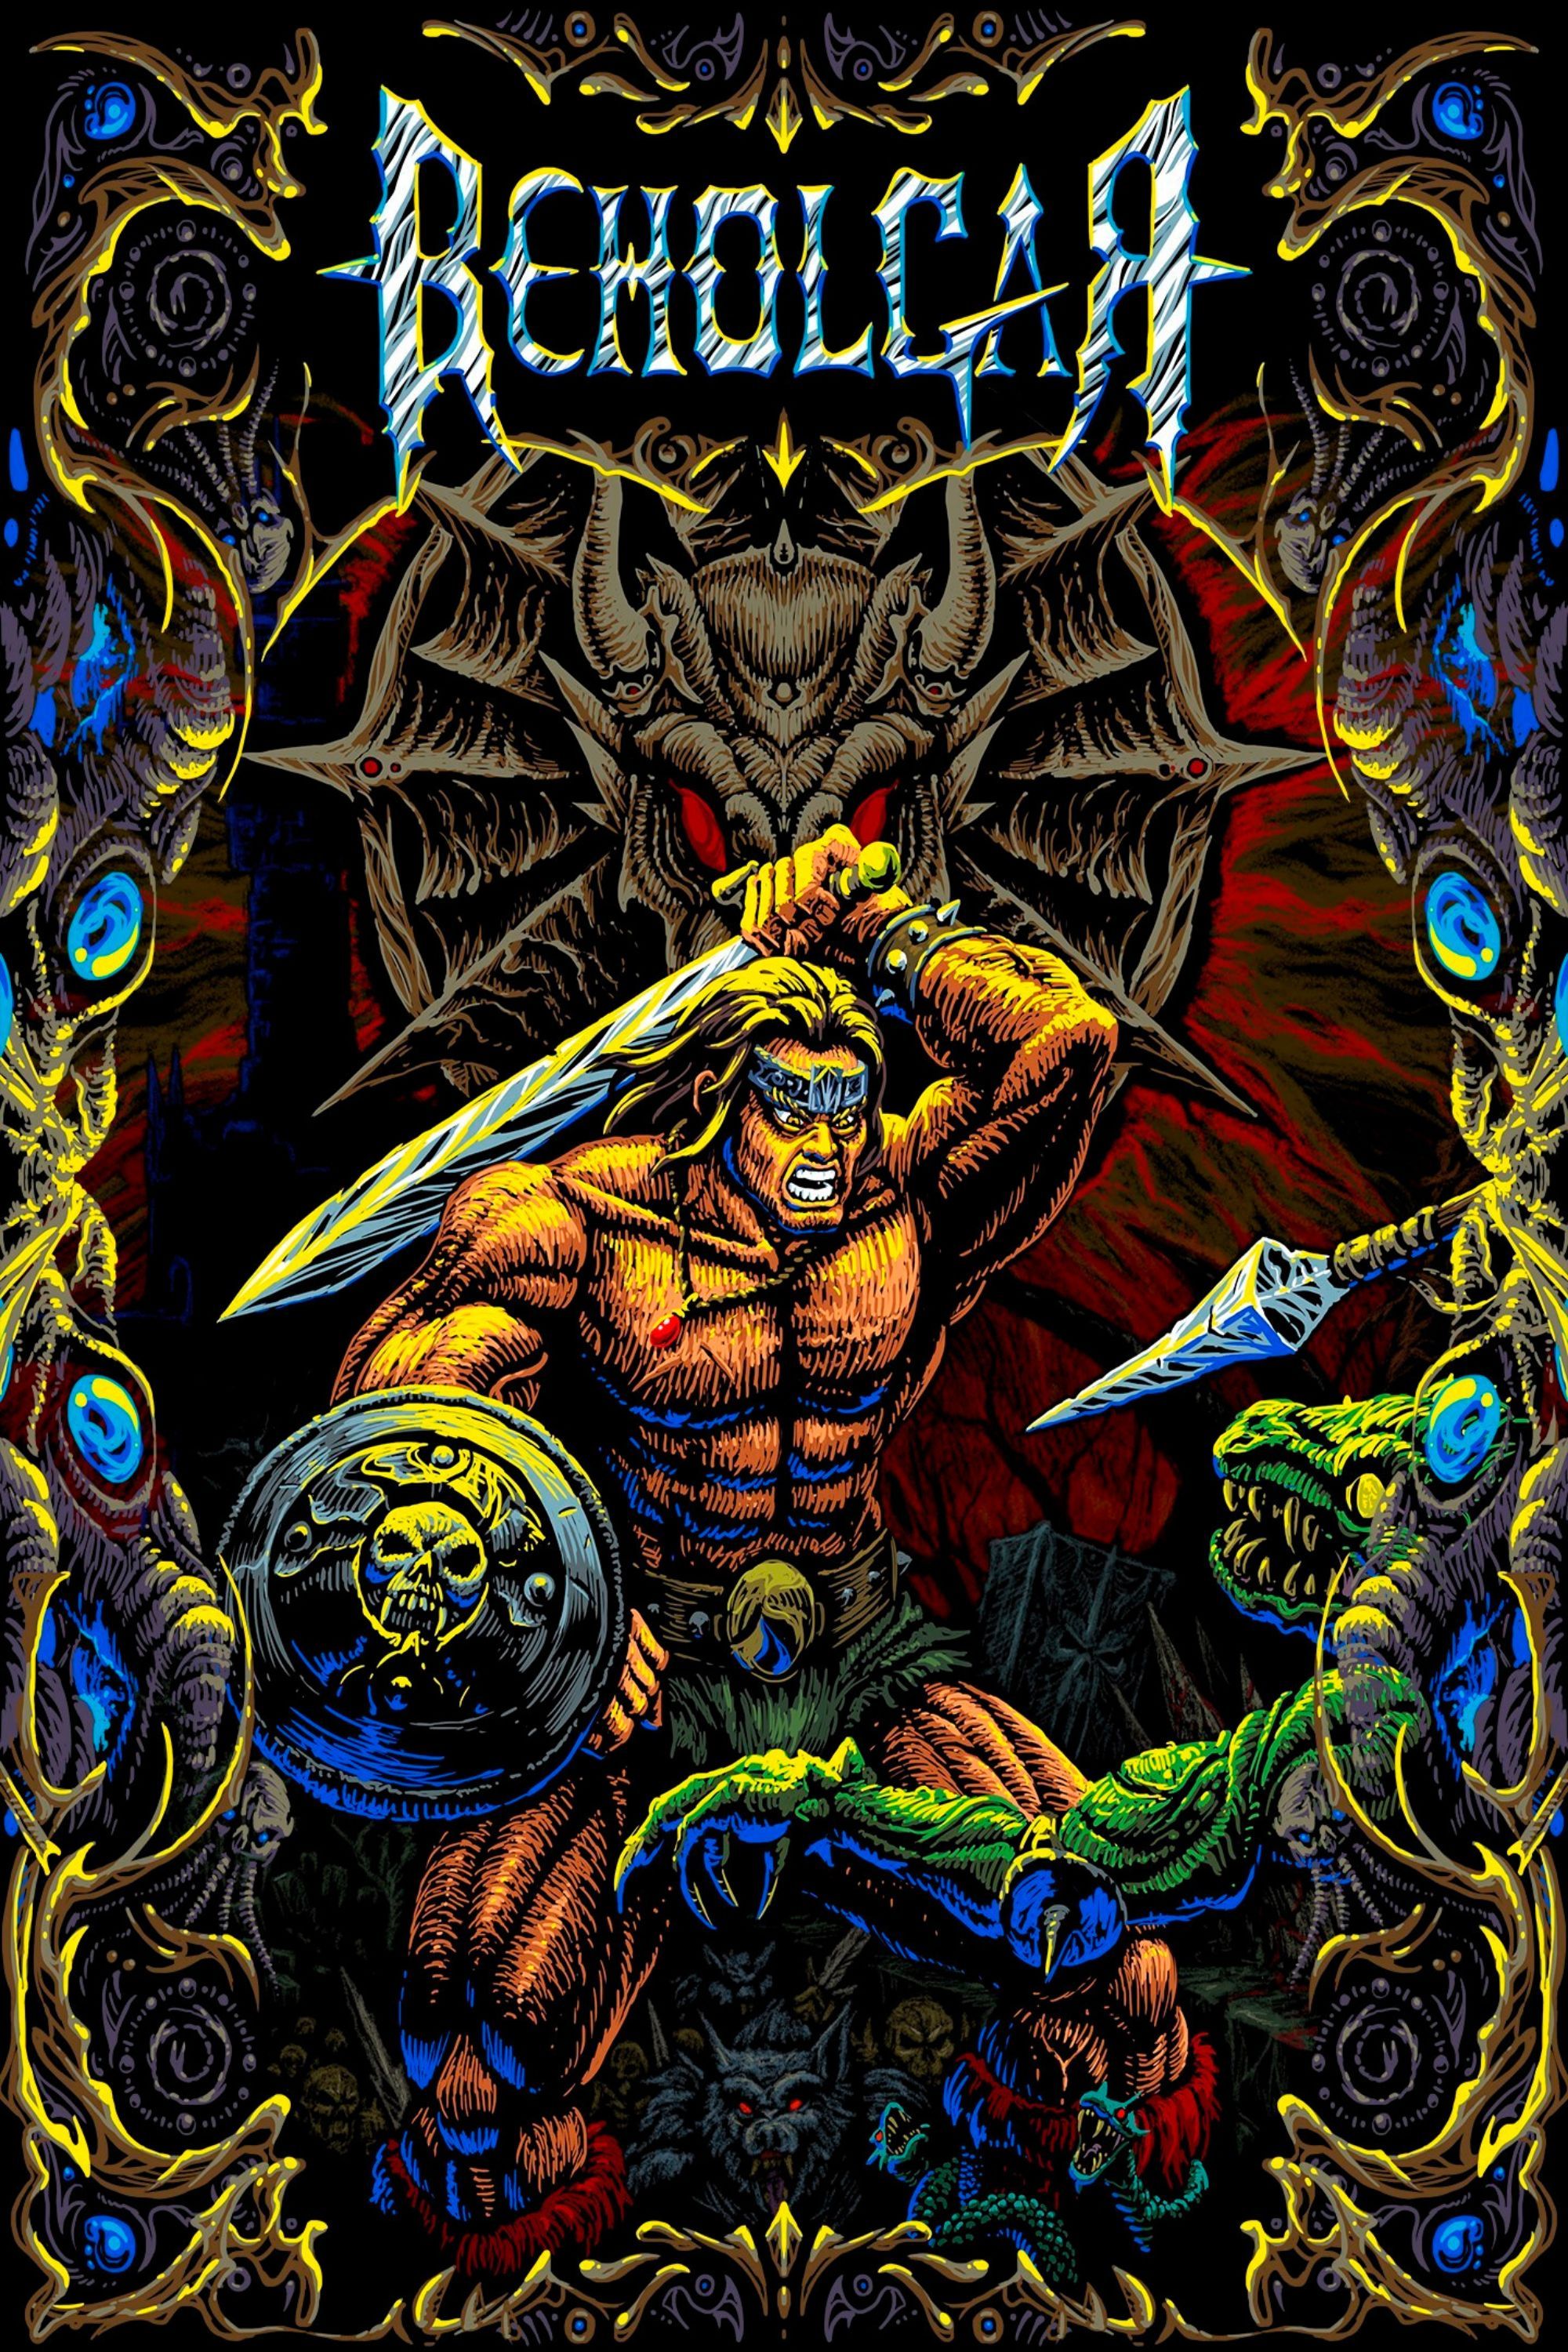 2000x3000 tag image for Beholgar showing a shirtless warrior with a sword and shield attacking a snake